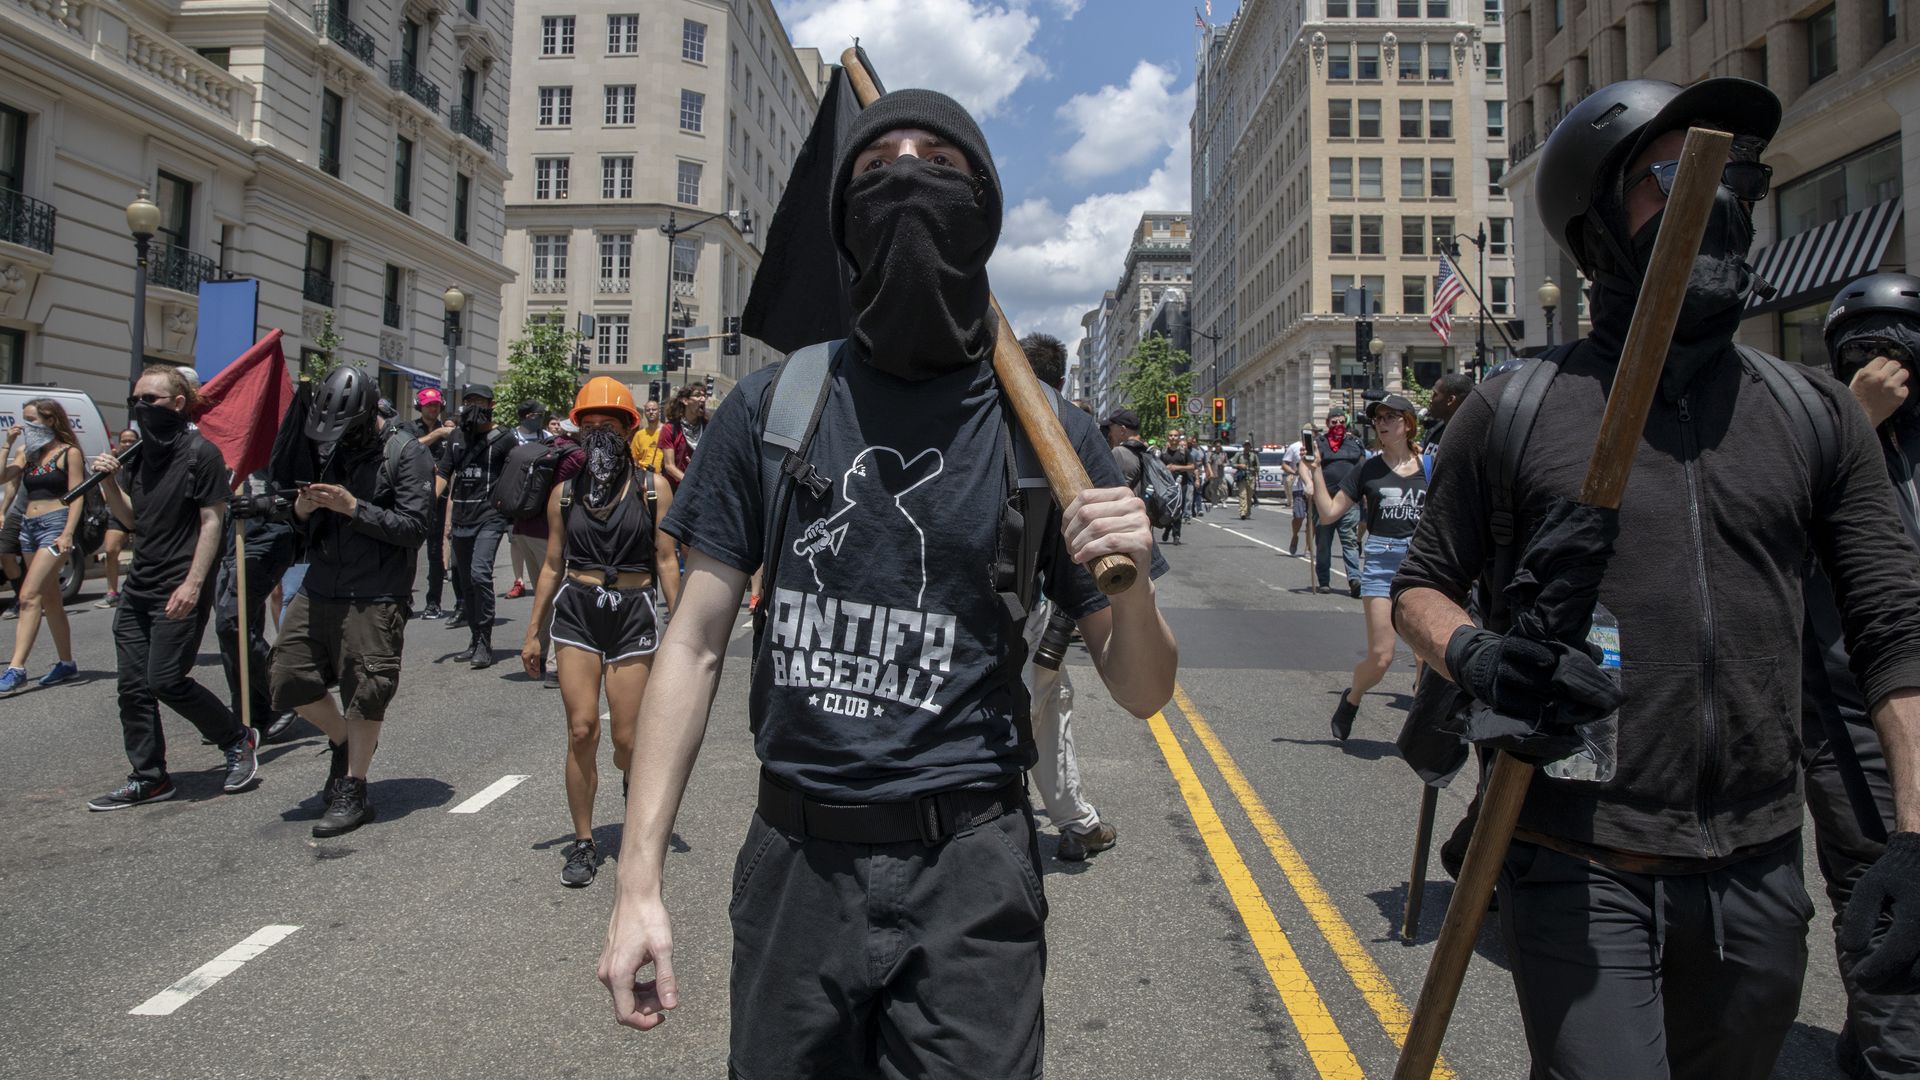 This image shows two black-clad antifa members carrying black flags down the street with their faces covered. other members follow behind them.